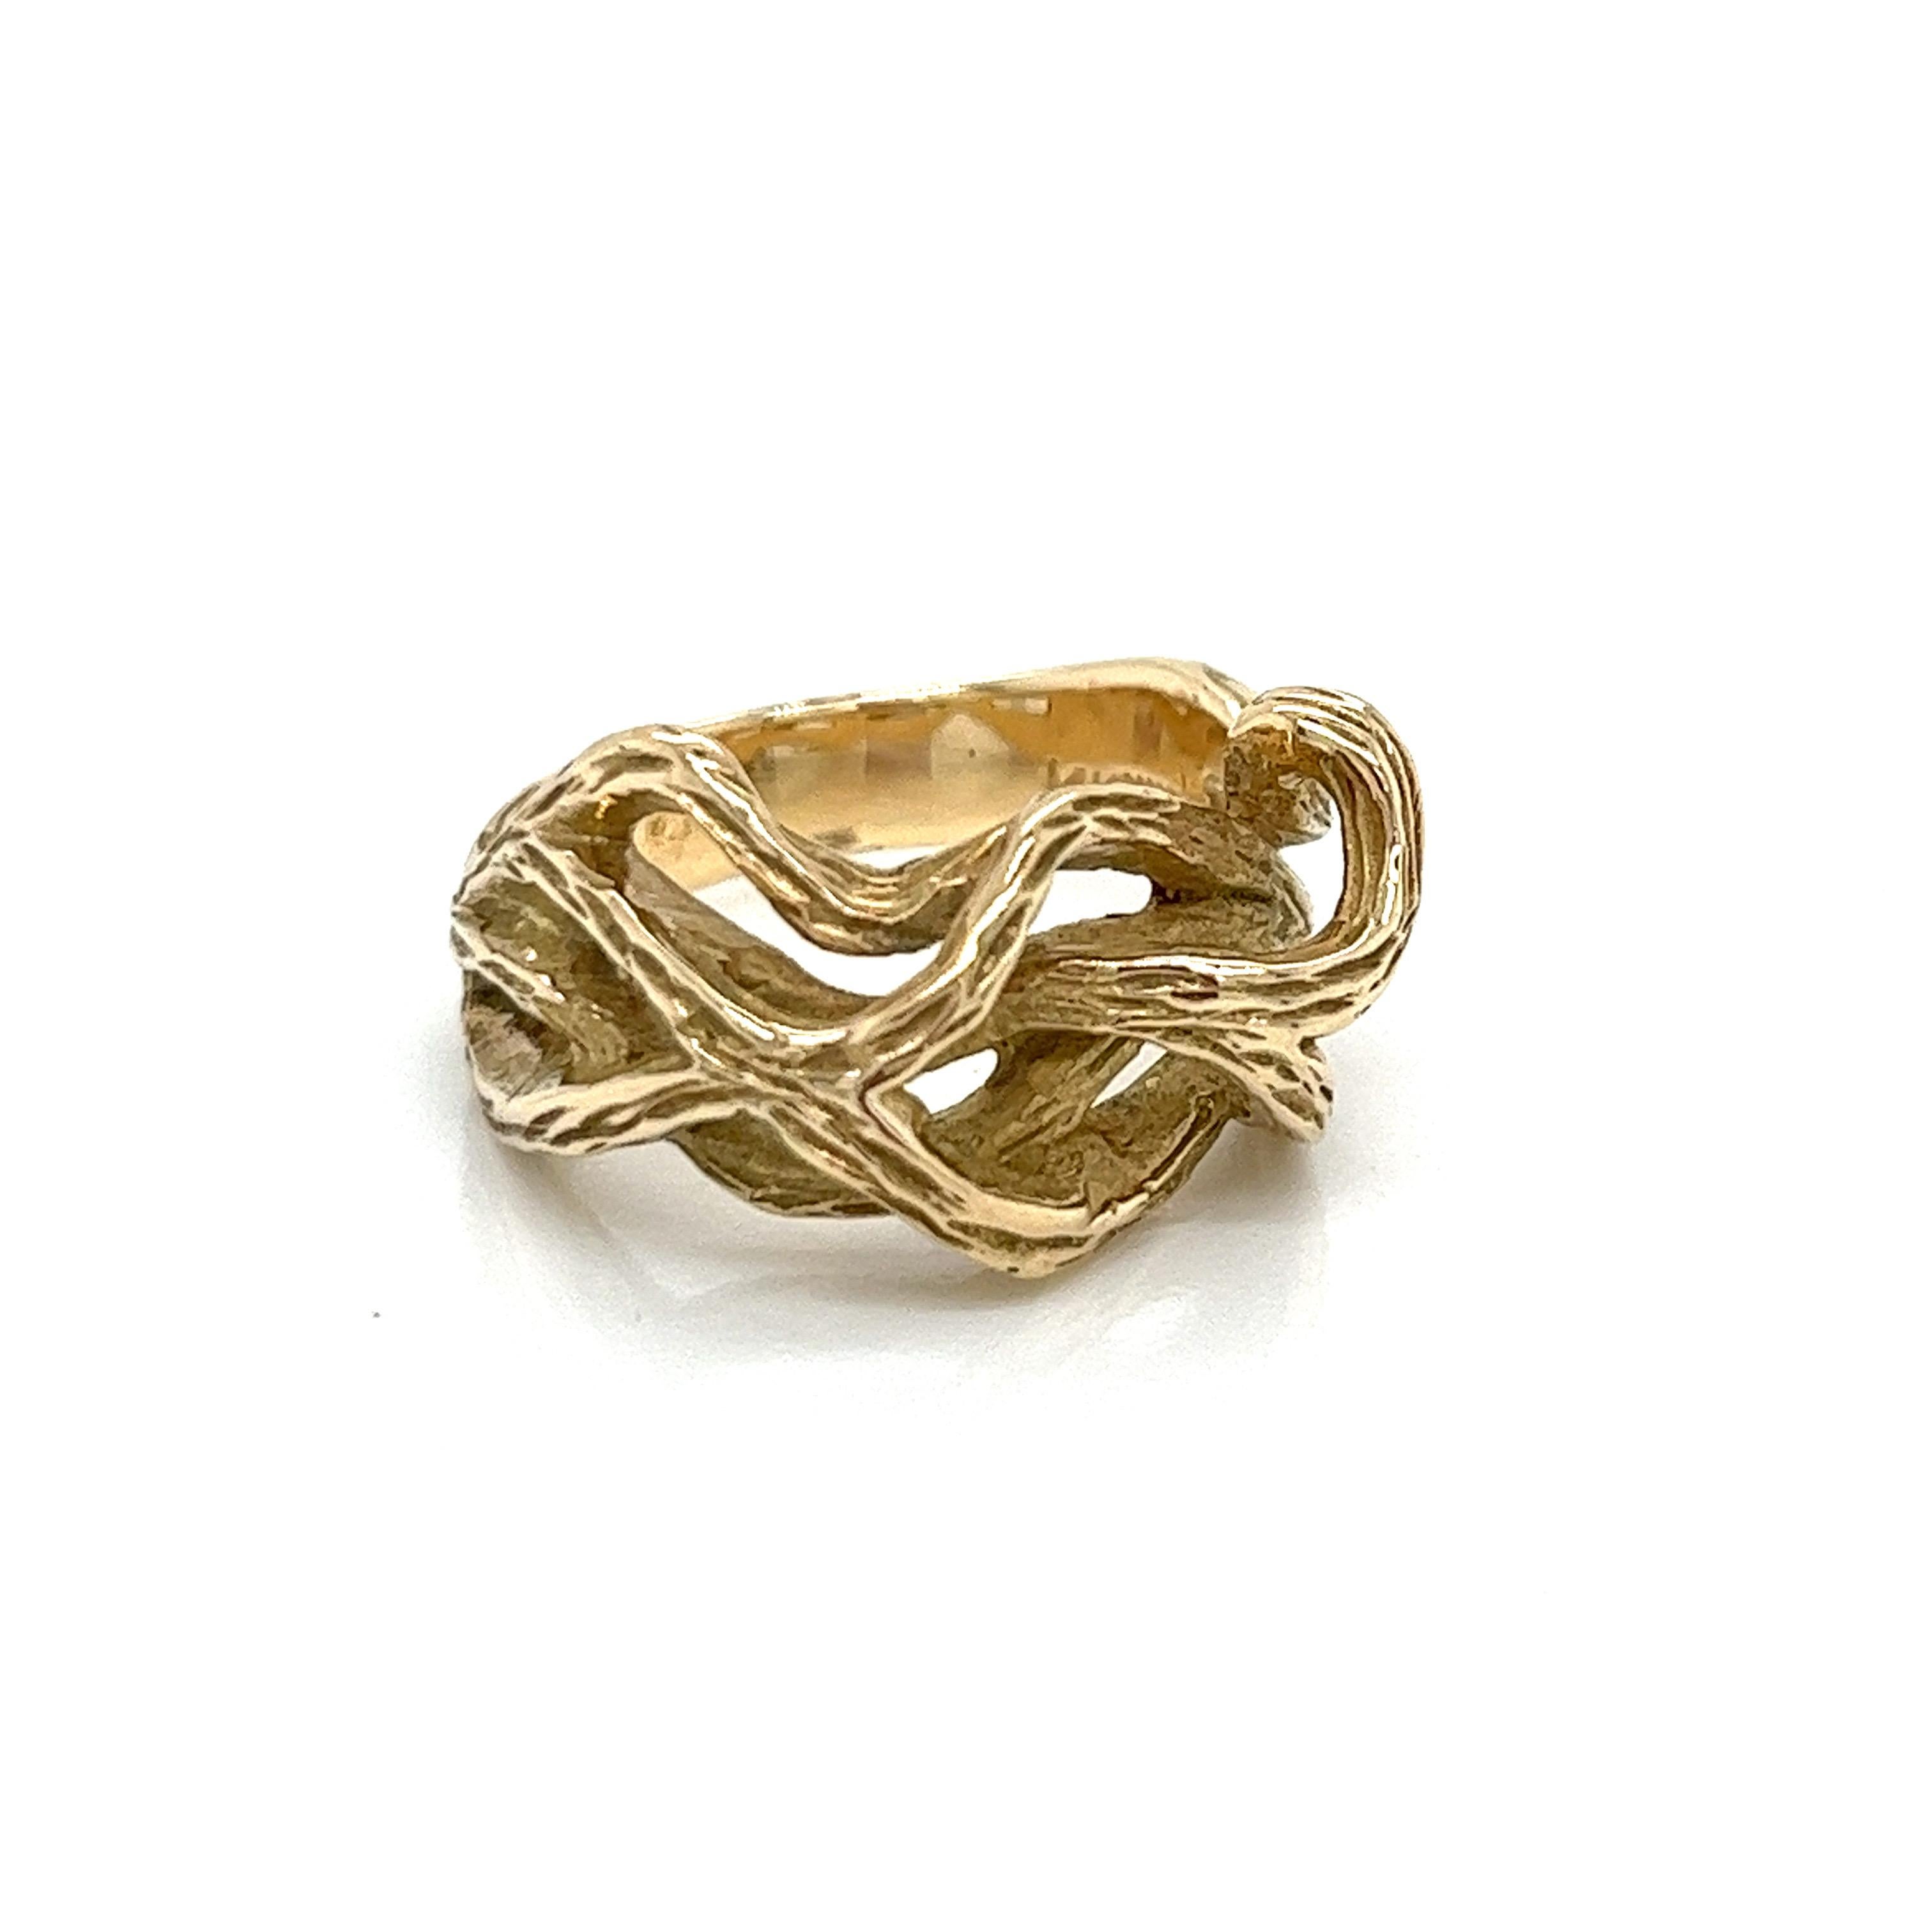 Vintage 1980's 14k Yellow Gold Twisted Gold Statement Ring. The width of the ring on top is 10.3mm and tapers to 4.8mm wide on the bottom. The ring size is 6.5 and it can be sized upon request. The ring weighs 8.16g.